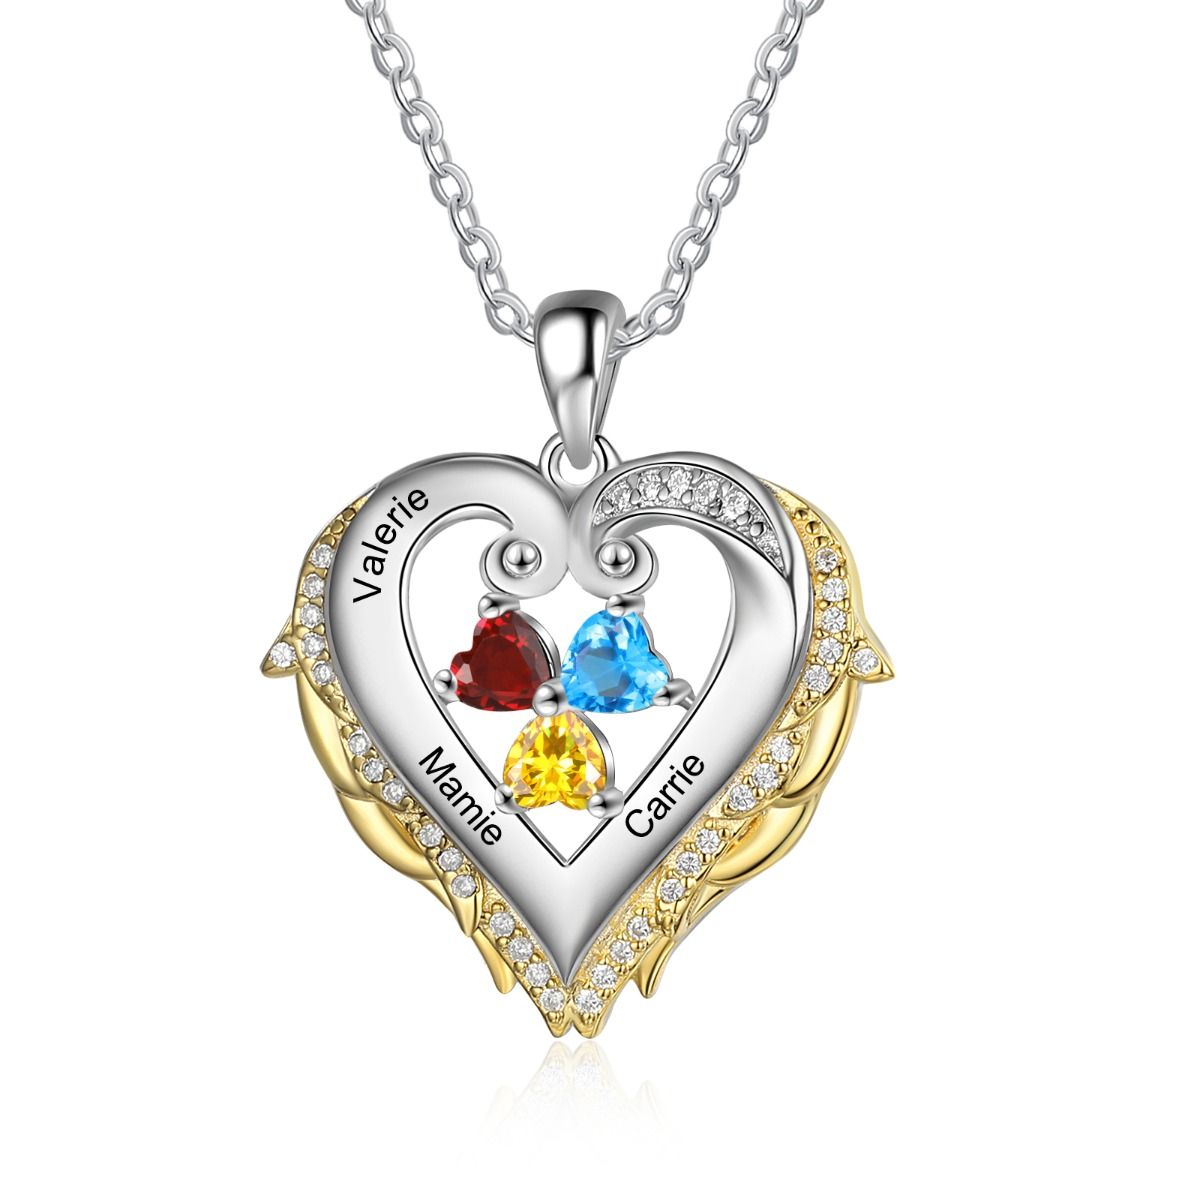 Personalised Necklace With Names Engraved and 2-4 Birthstones | Bespoke Necklace With Birthstones